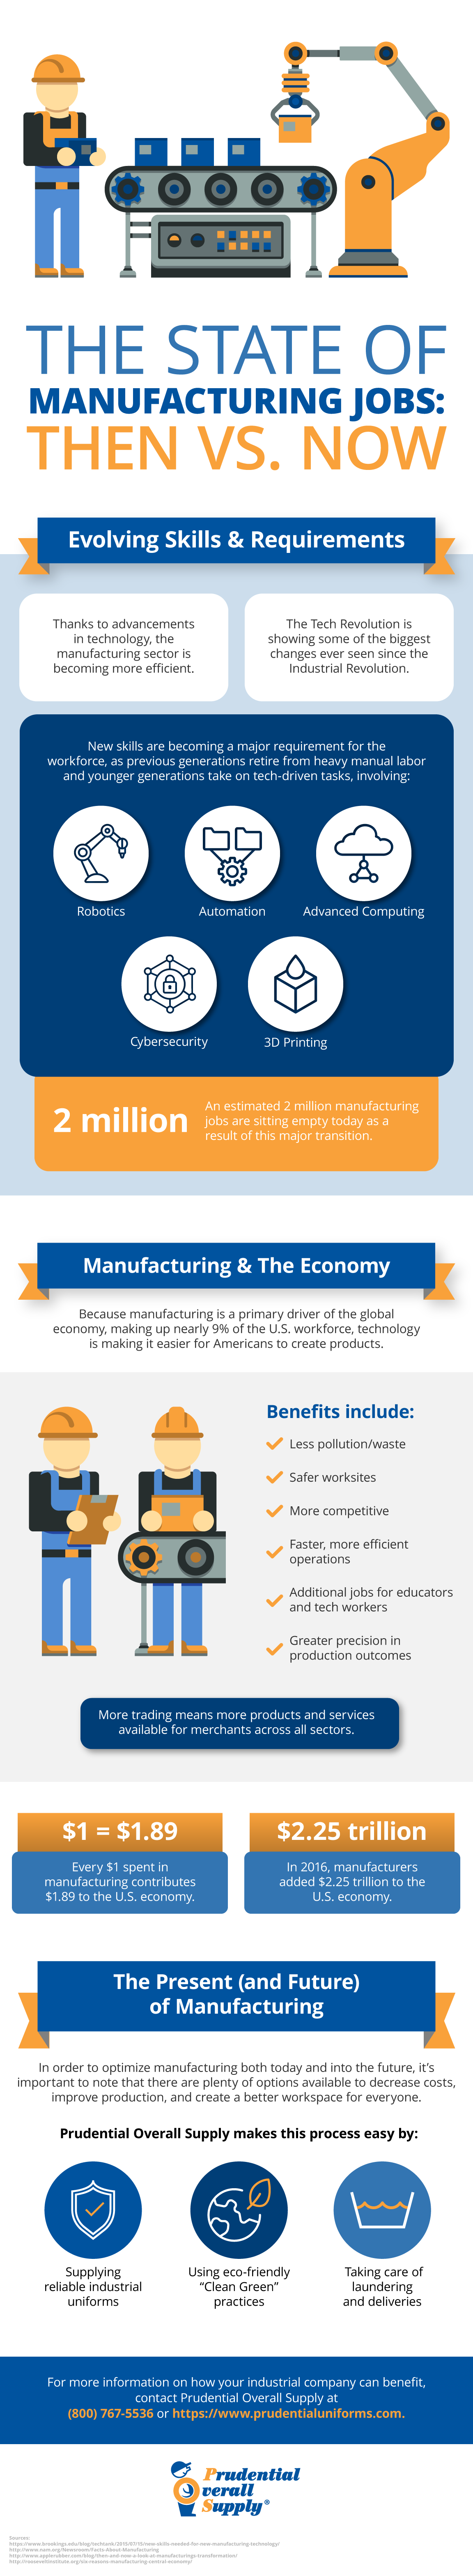 The State of Manufacturing Jobs: Then vs. Now